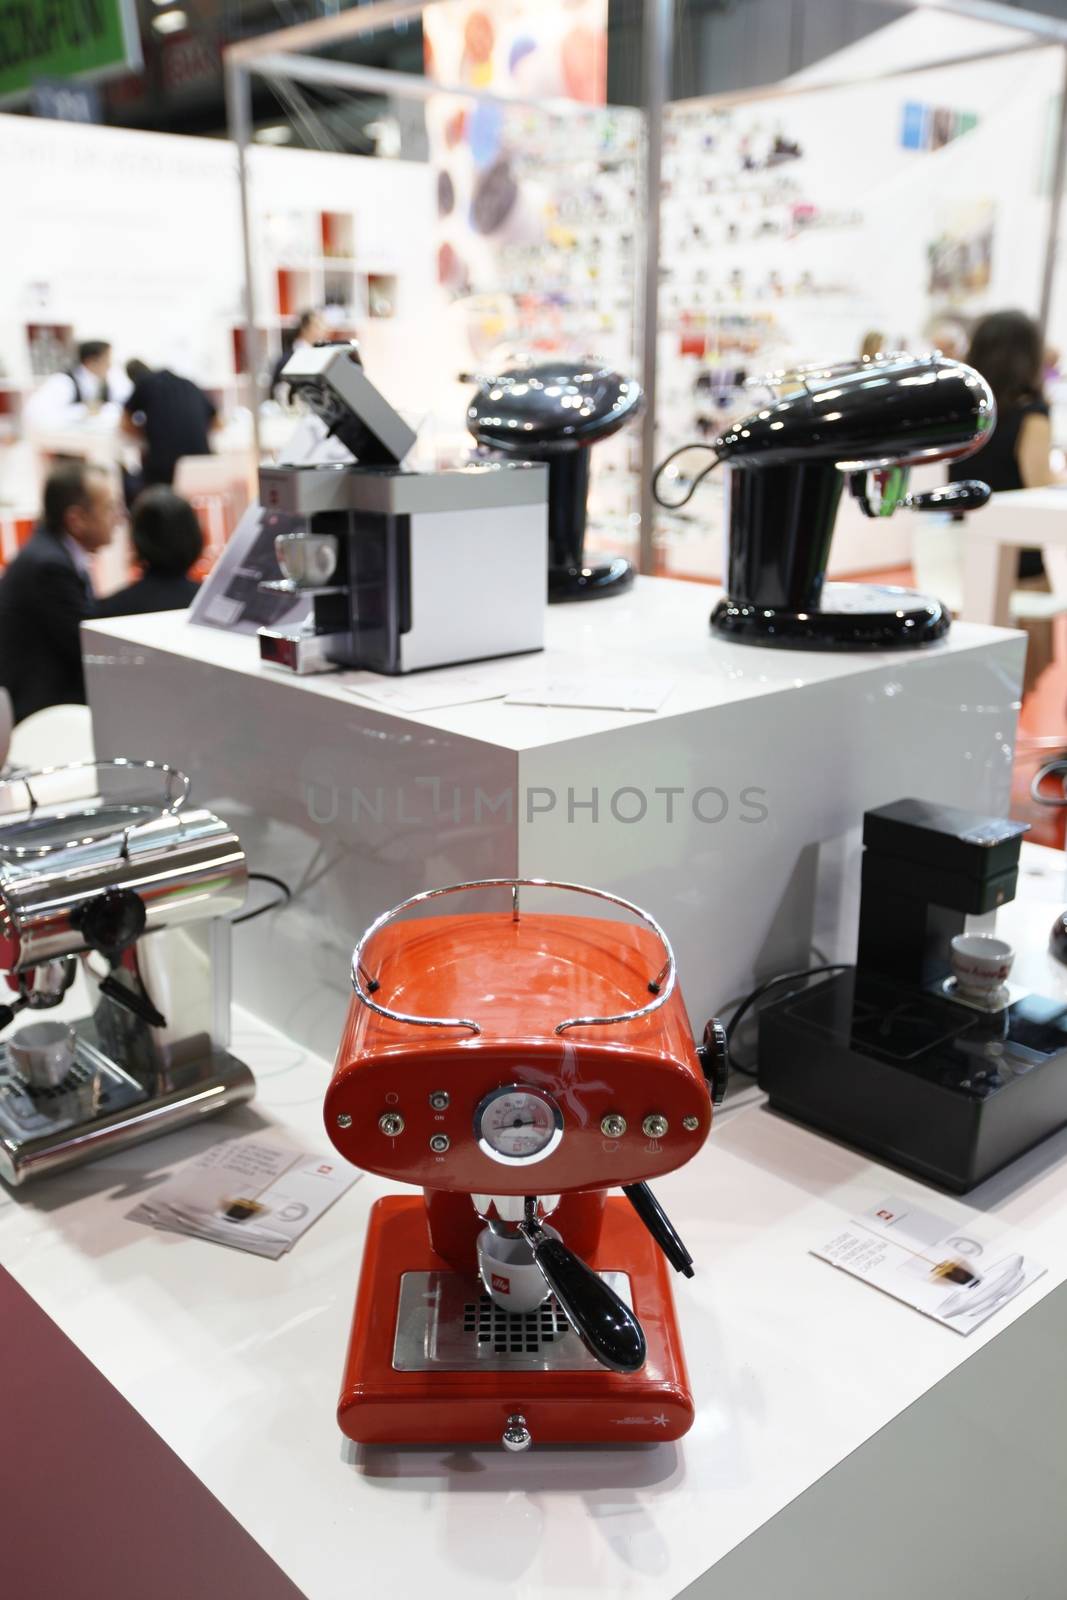 Illy Caffè coffee machines and cups in exhibition at Tuttofood 2013, Milano World Food Exhibition.